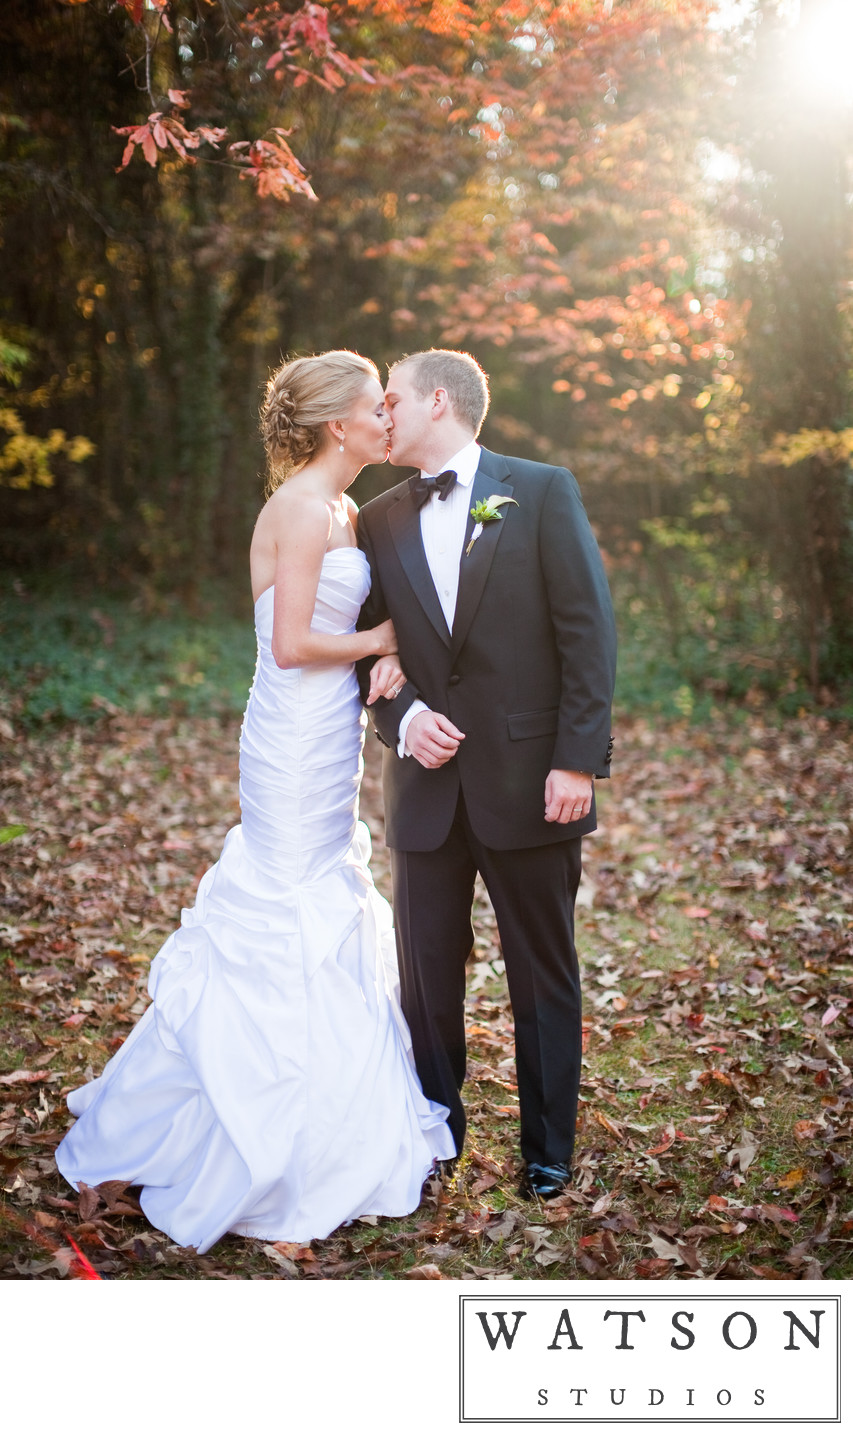 Wedding Photographers in Knoxville TN